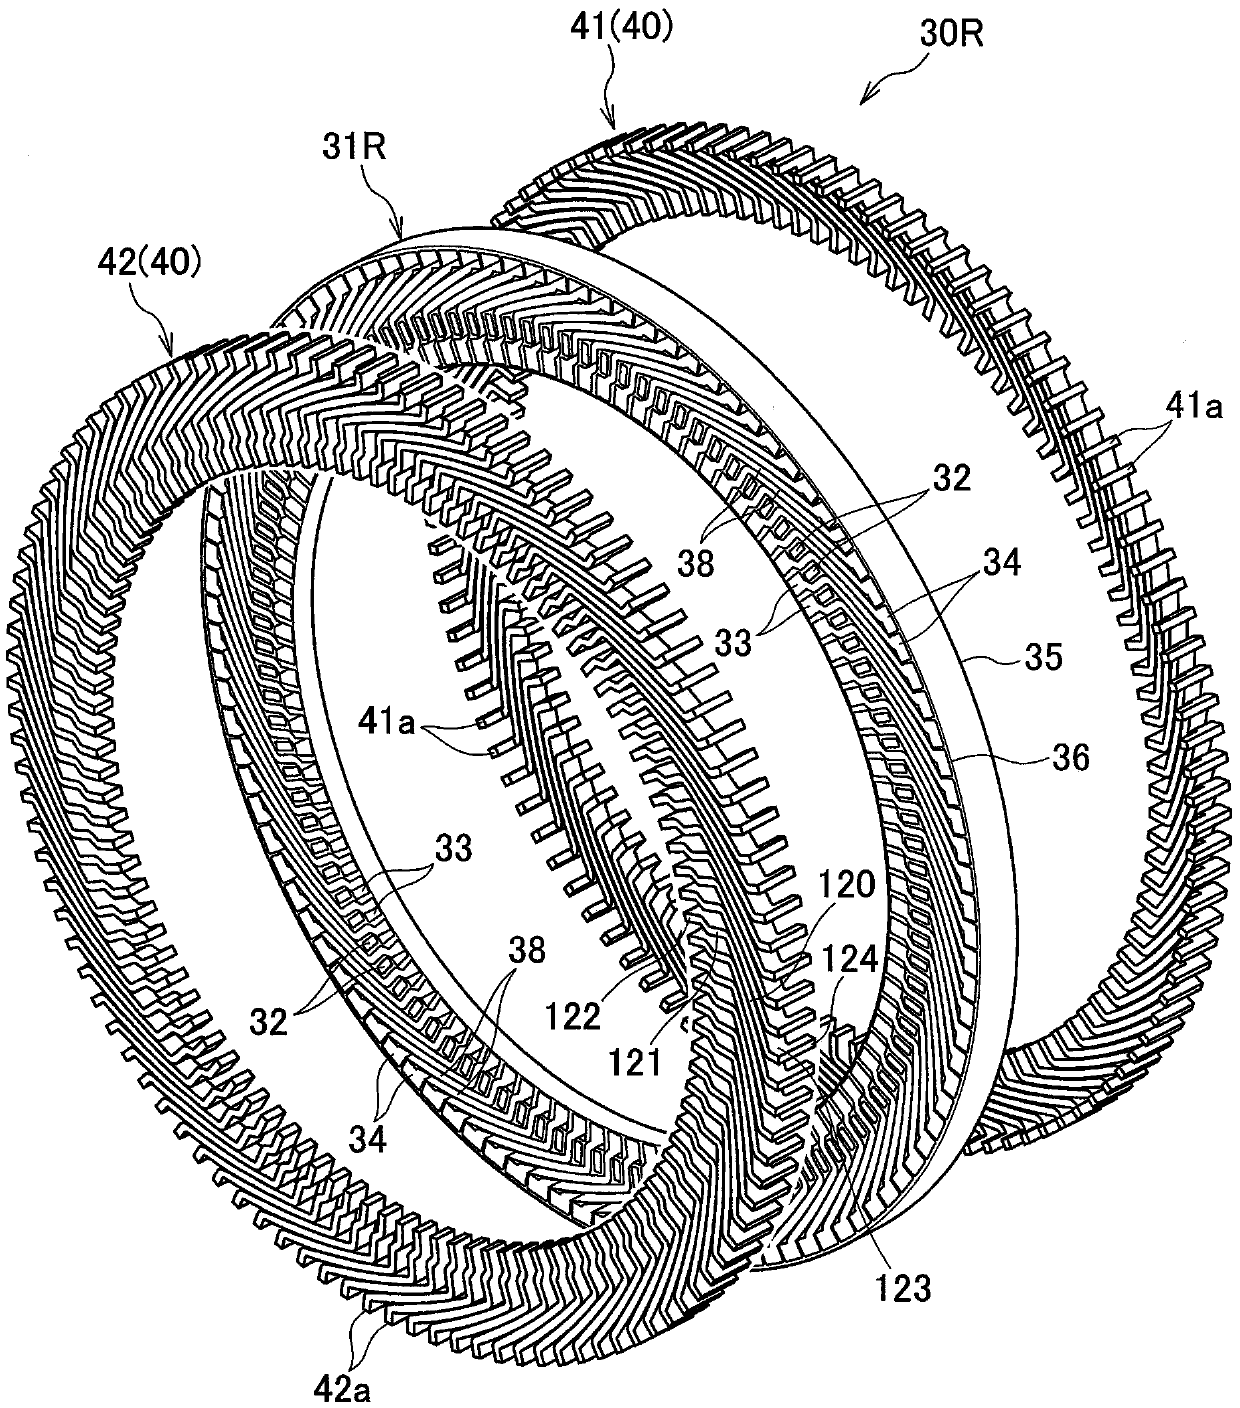 Stator of a rotating electrical machine